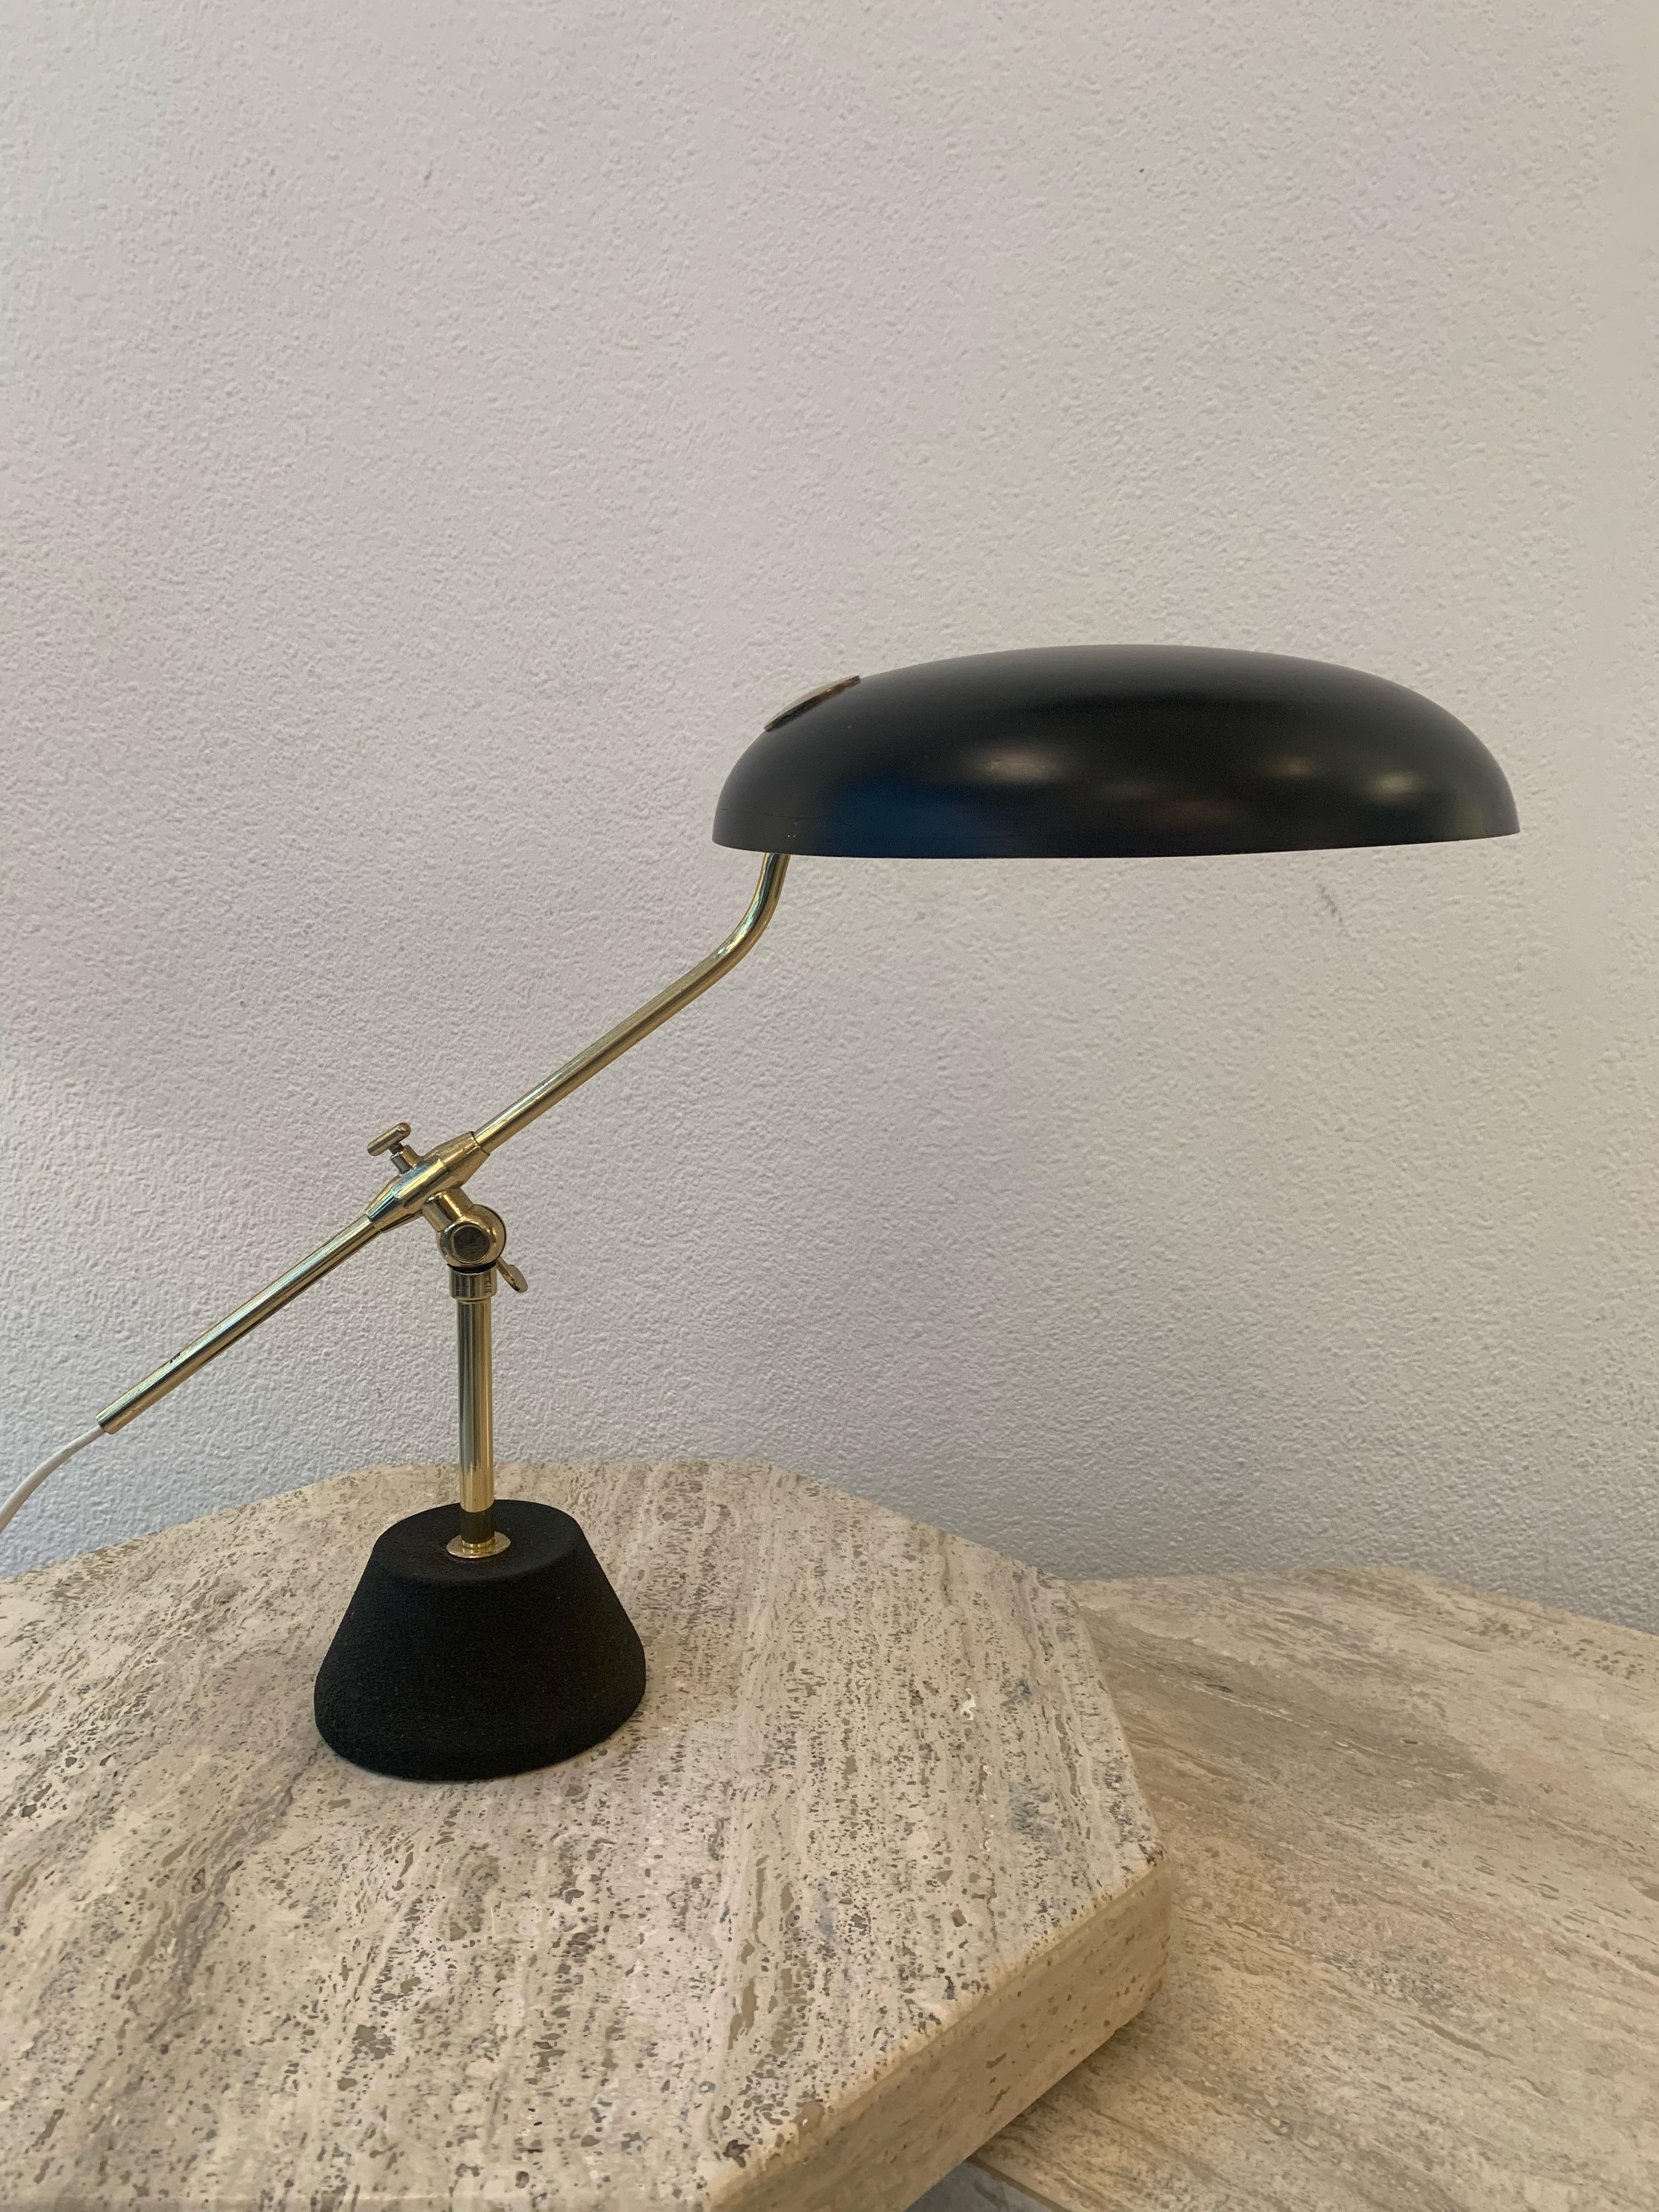 Black aluminum articulated shade table / desk lamp by BAG Turgi, Switzerland ca. 1950's
3 articulations. Some traces on the shade.